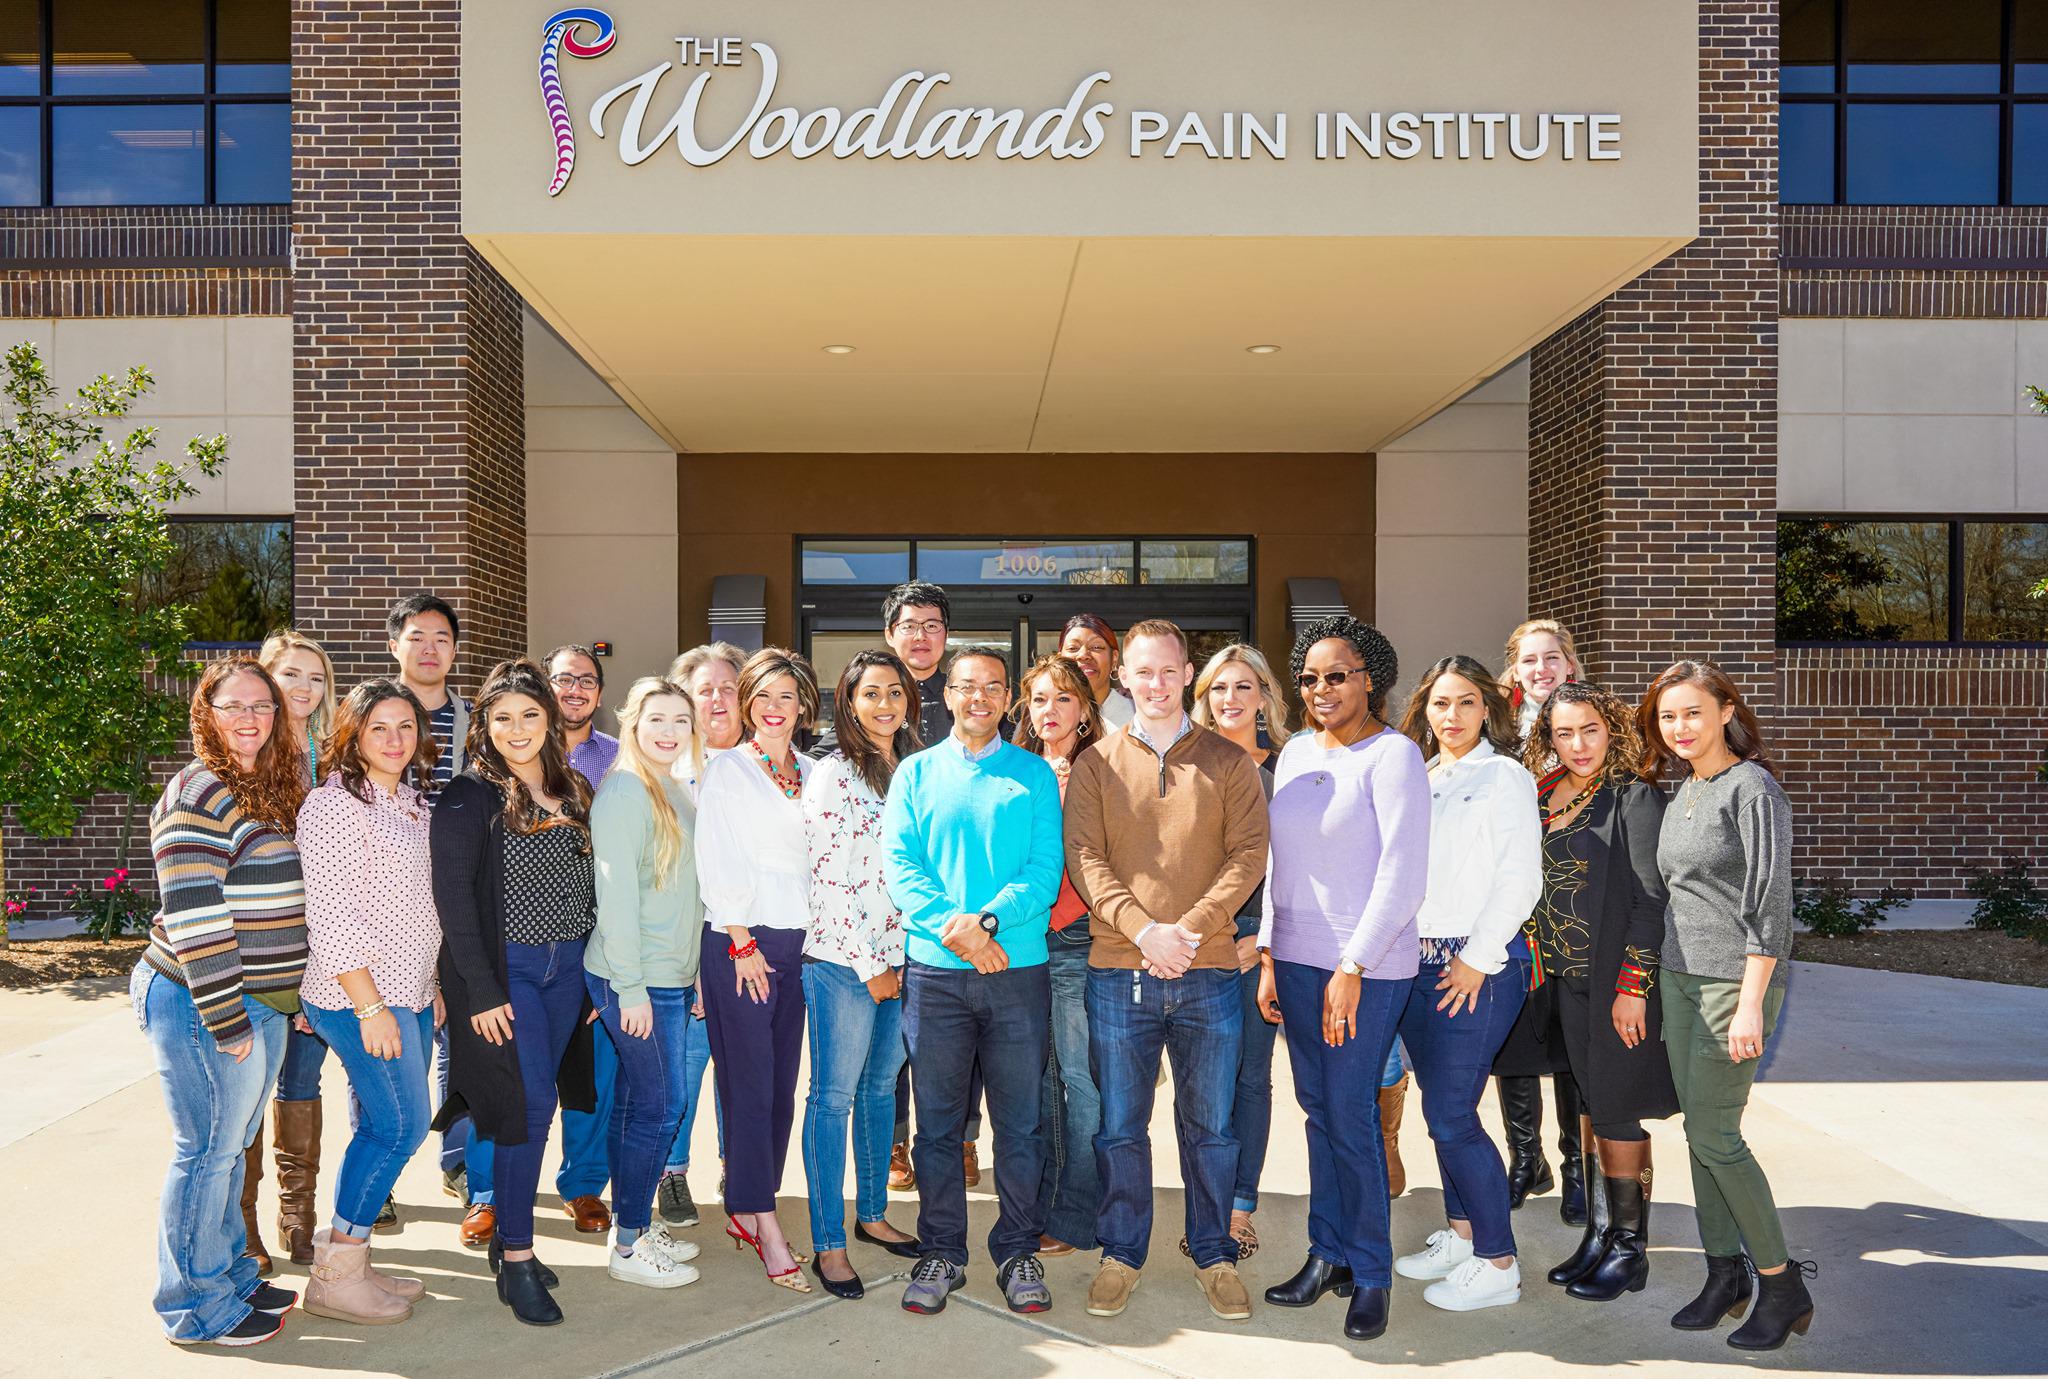 The Woodlands Pain Institute Photo